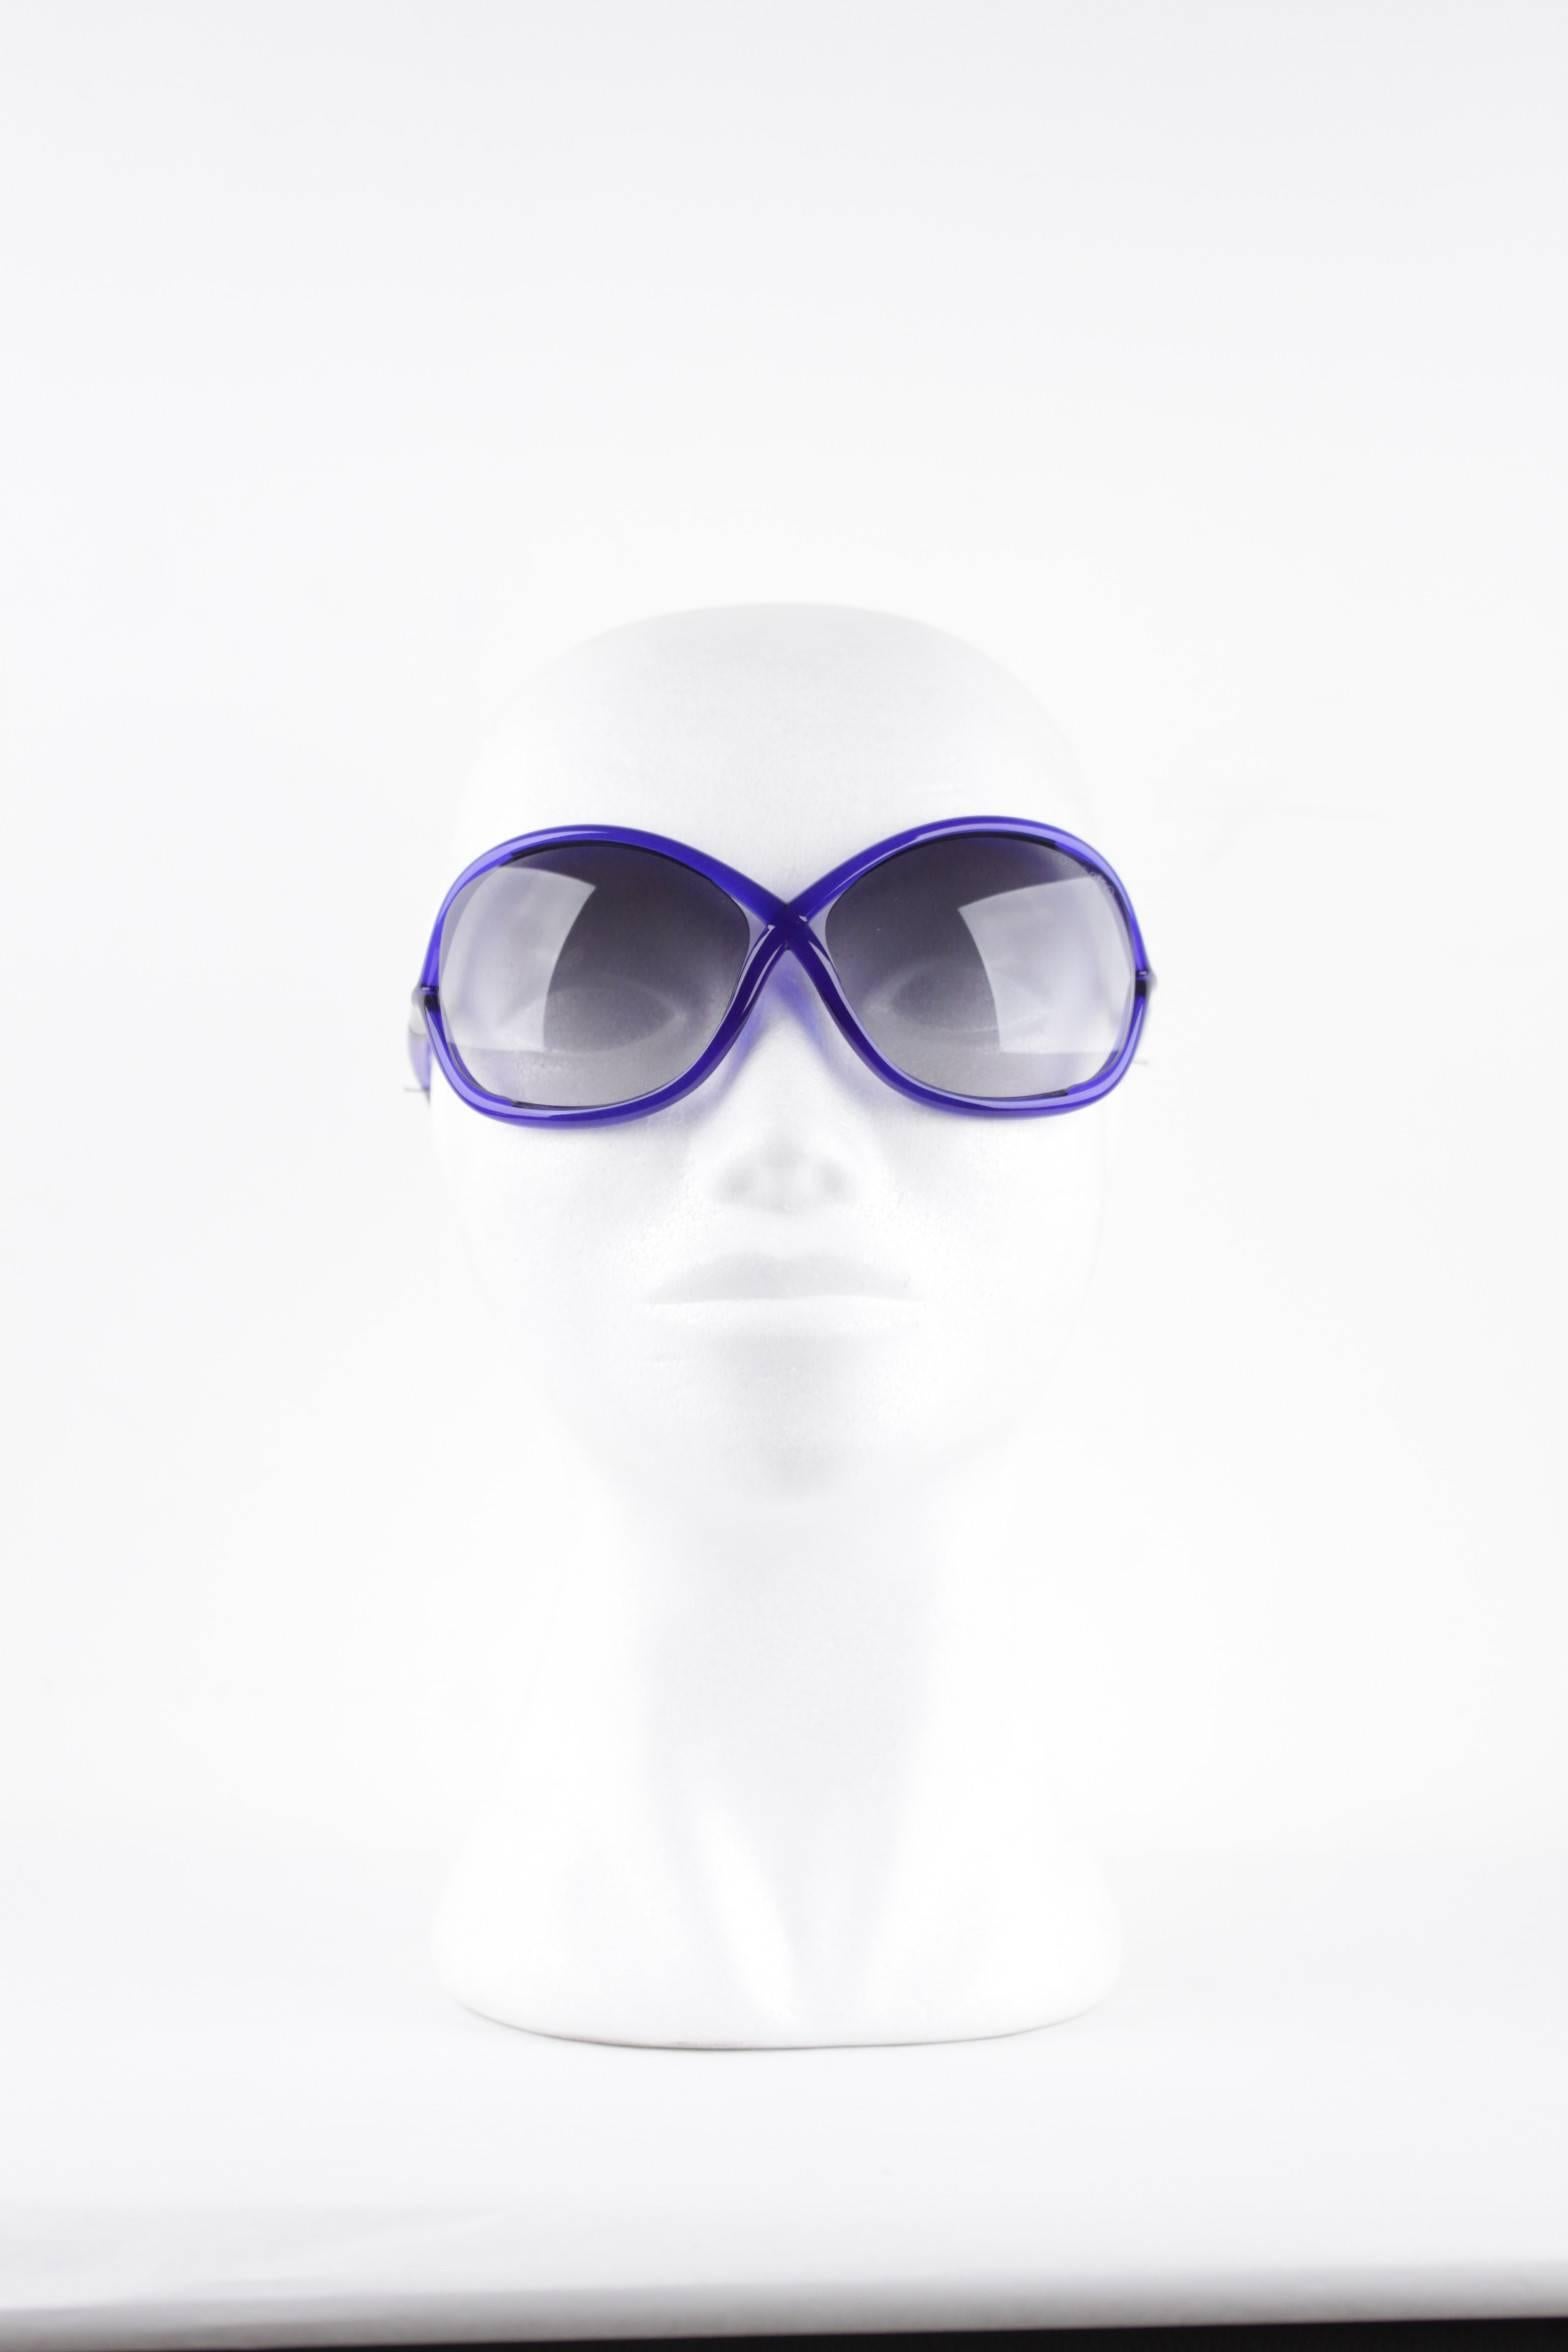 - WHITNEY TF9 sunglasses by Tom Ford
- Oversized soft round plastic sunglasses with iconic crossover detail
- Metal 'T' inserts on the tubular temples and cutaway lenses 
- Color: Blue
- Gradient 100% UV protection lenses
- Made in Italy
- Serial